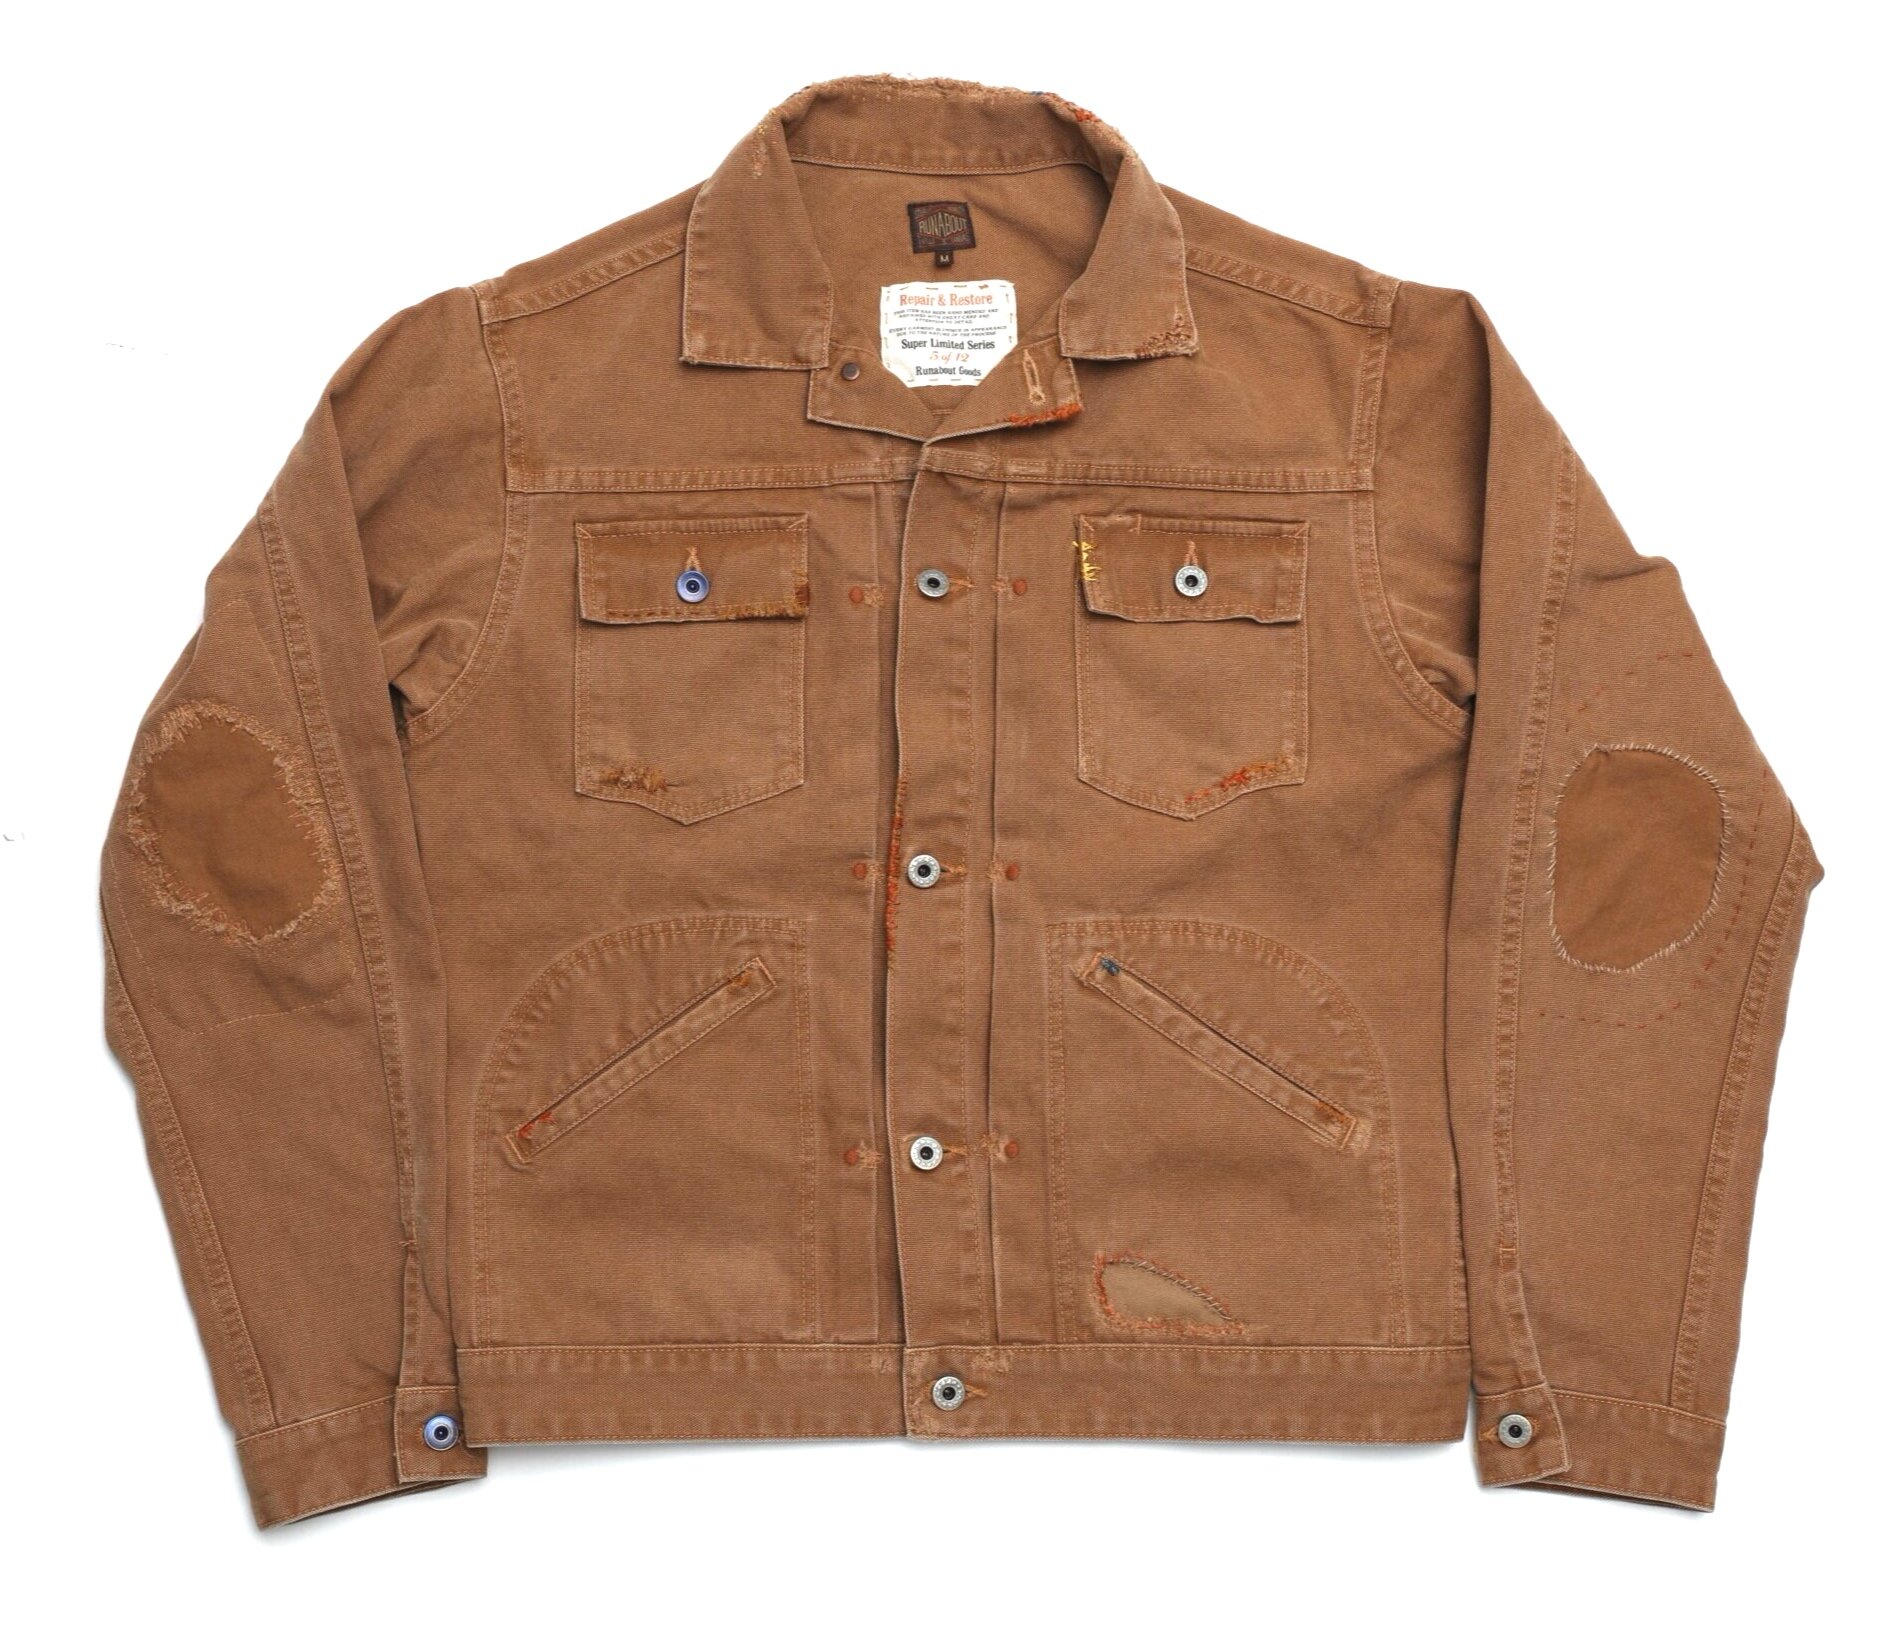 Outerwear — Runabout Goods